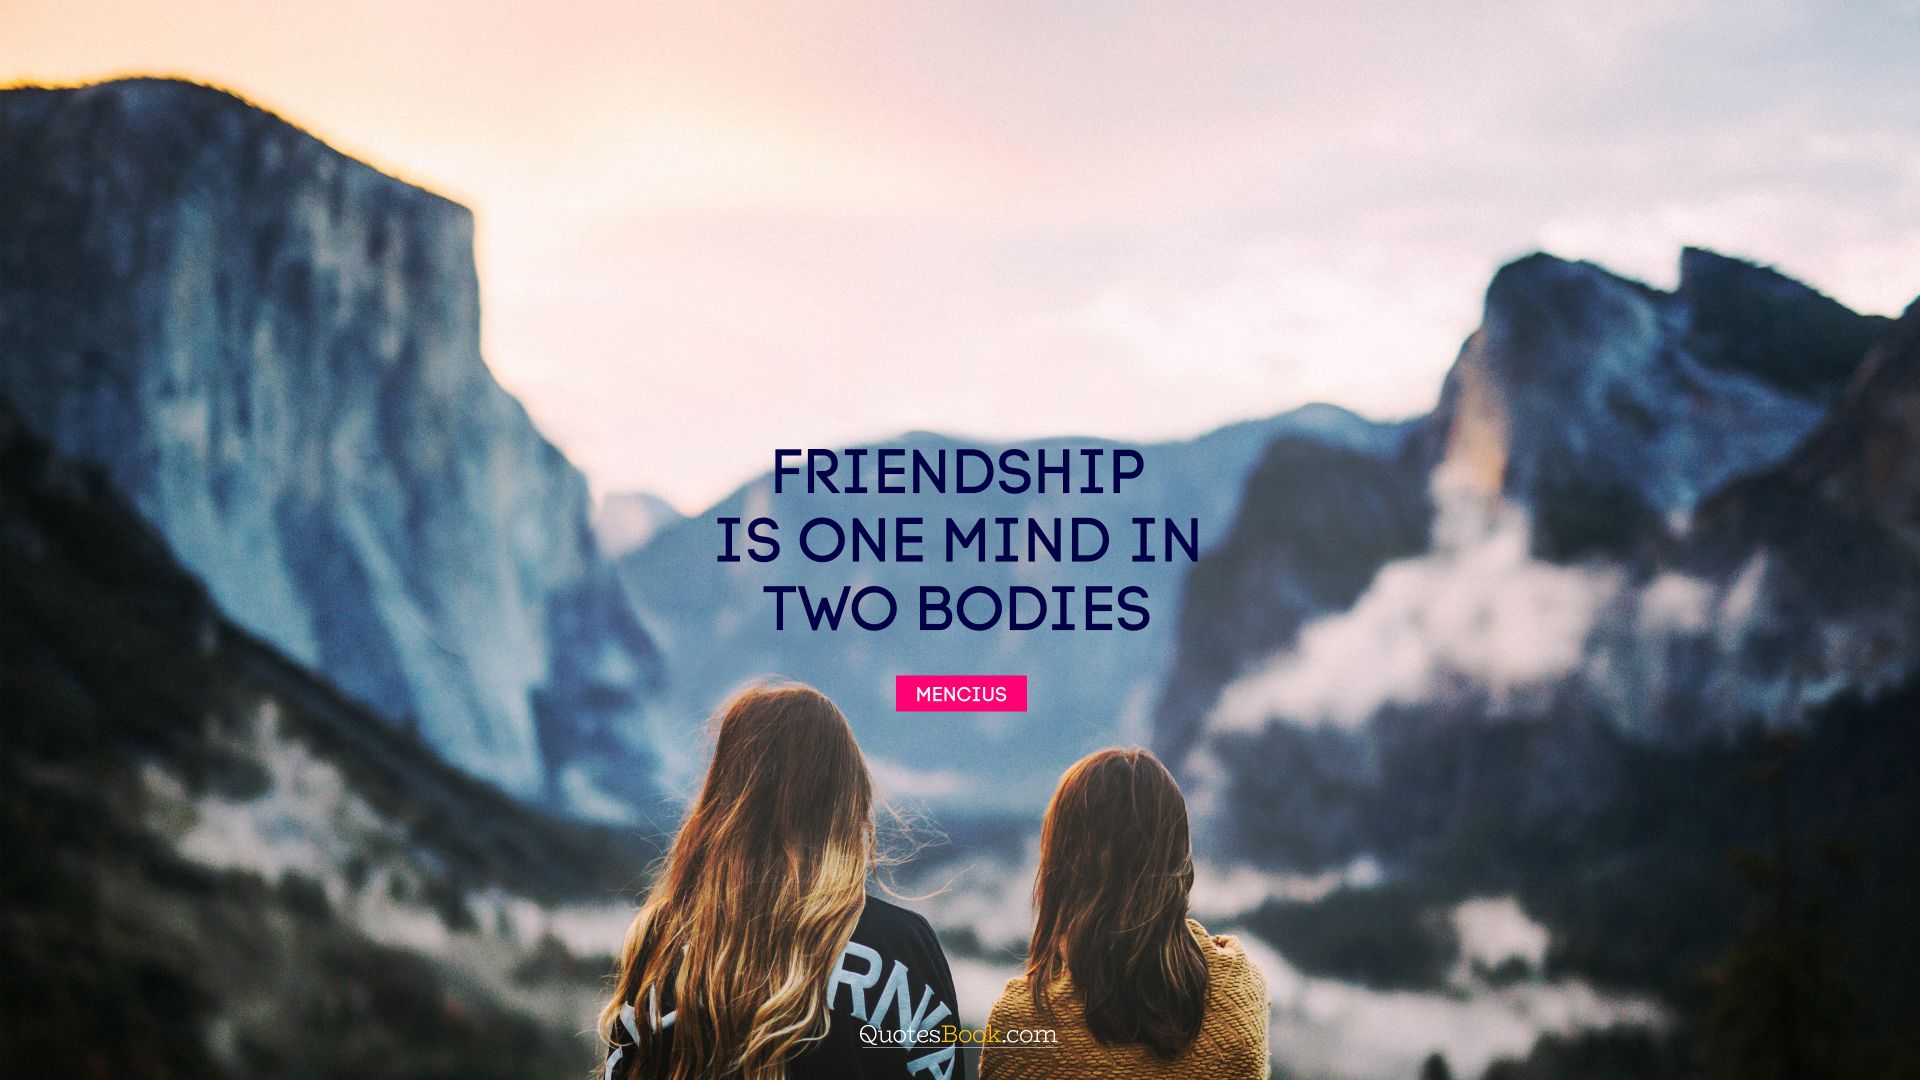 Friendship is one mind in two bodies. - Quote by Mencius